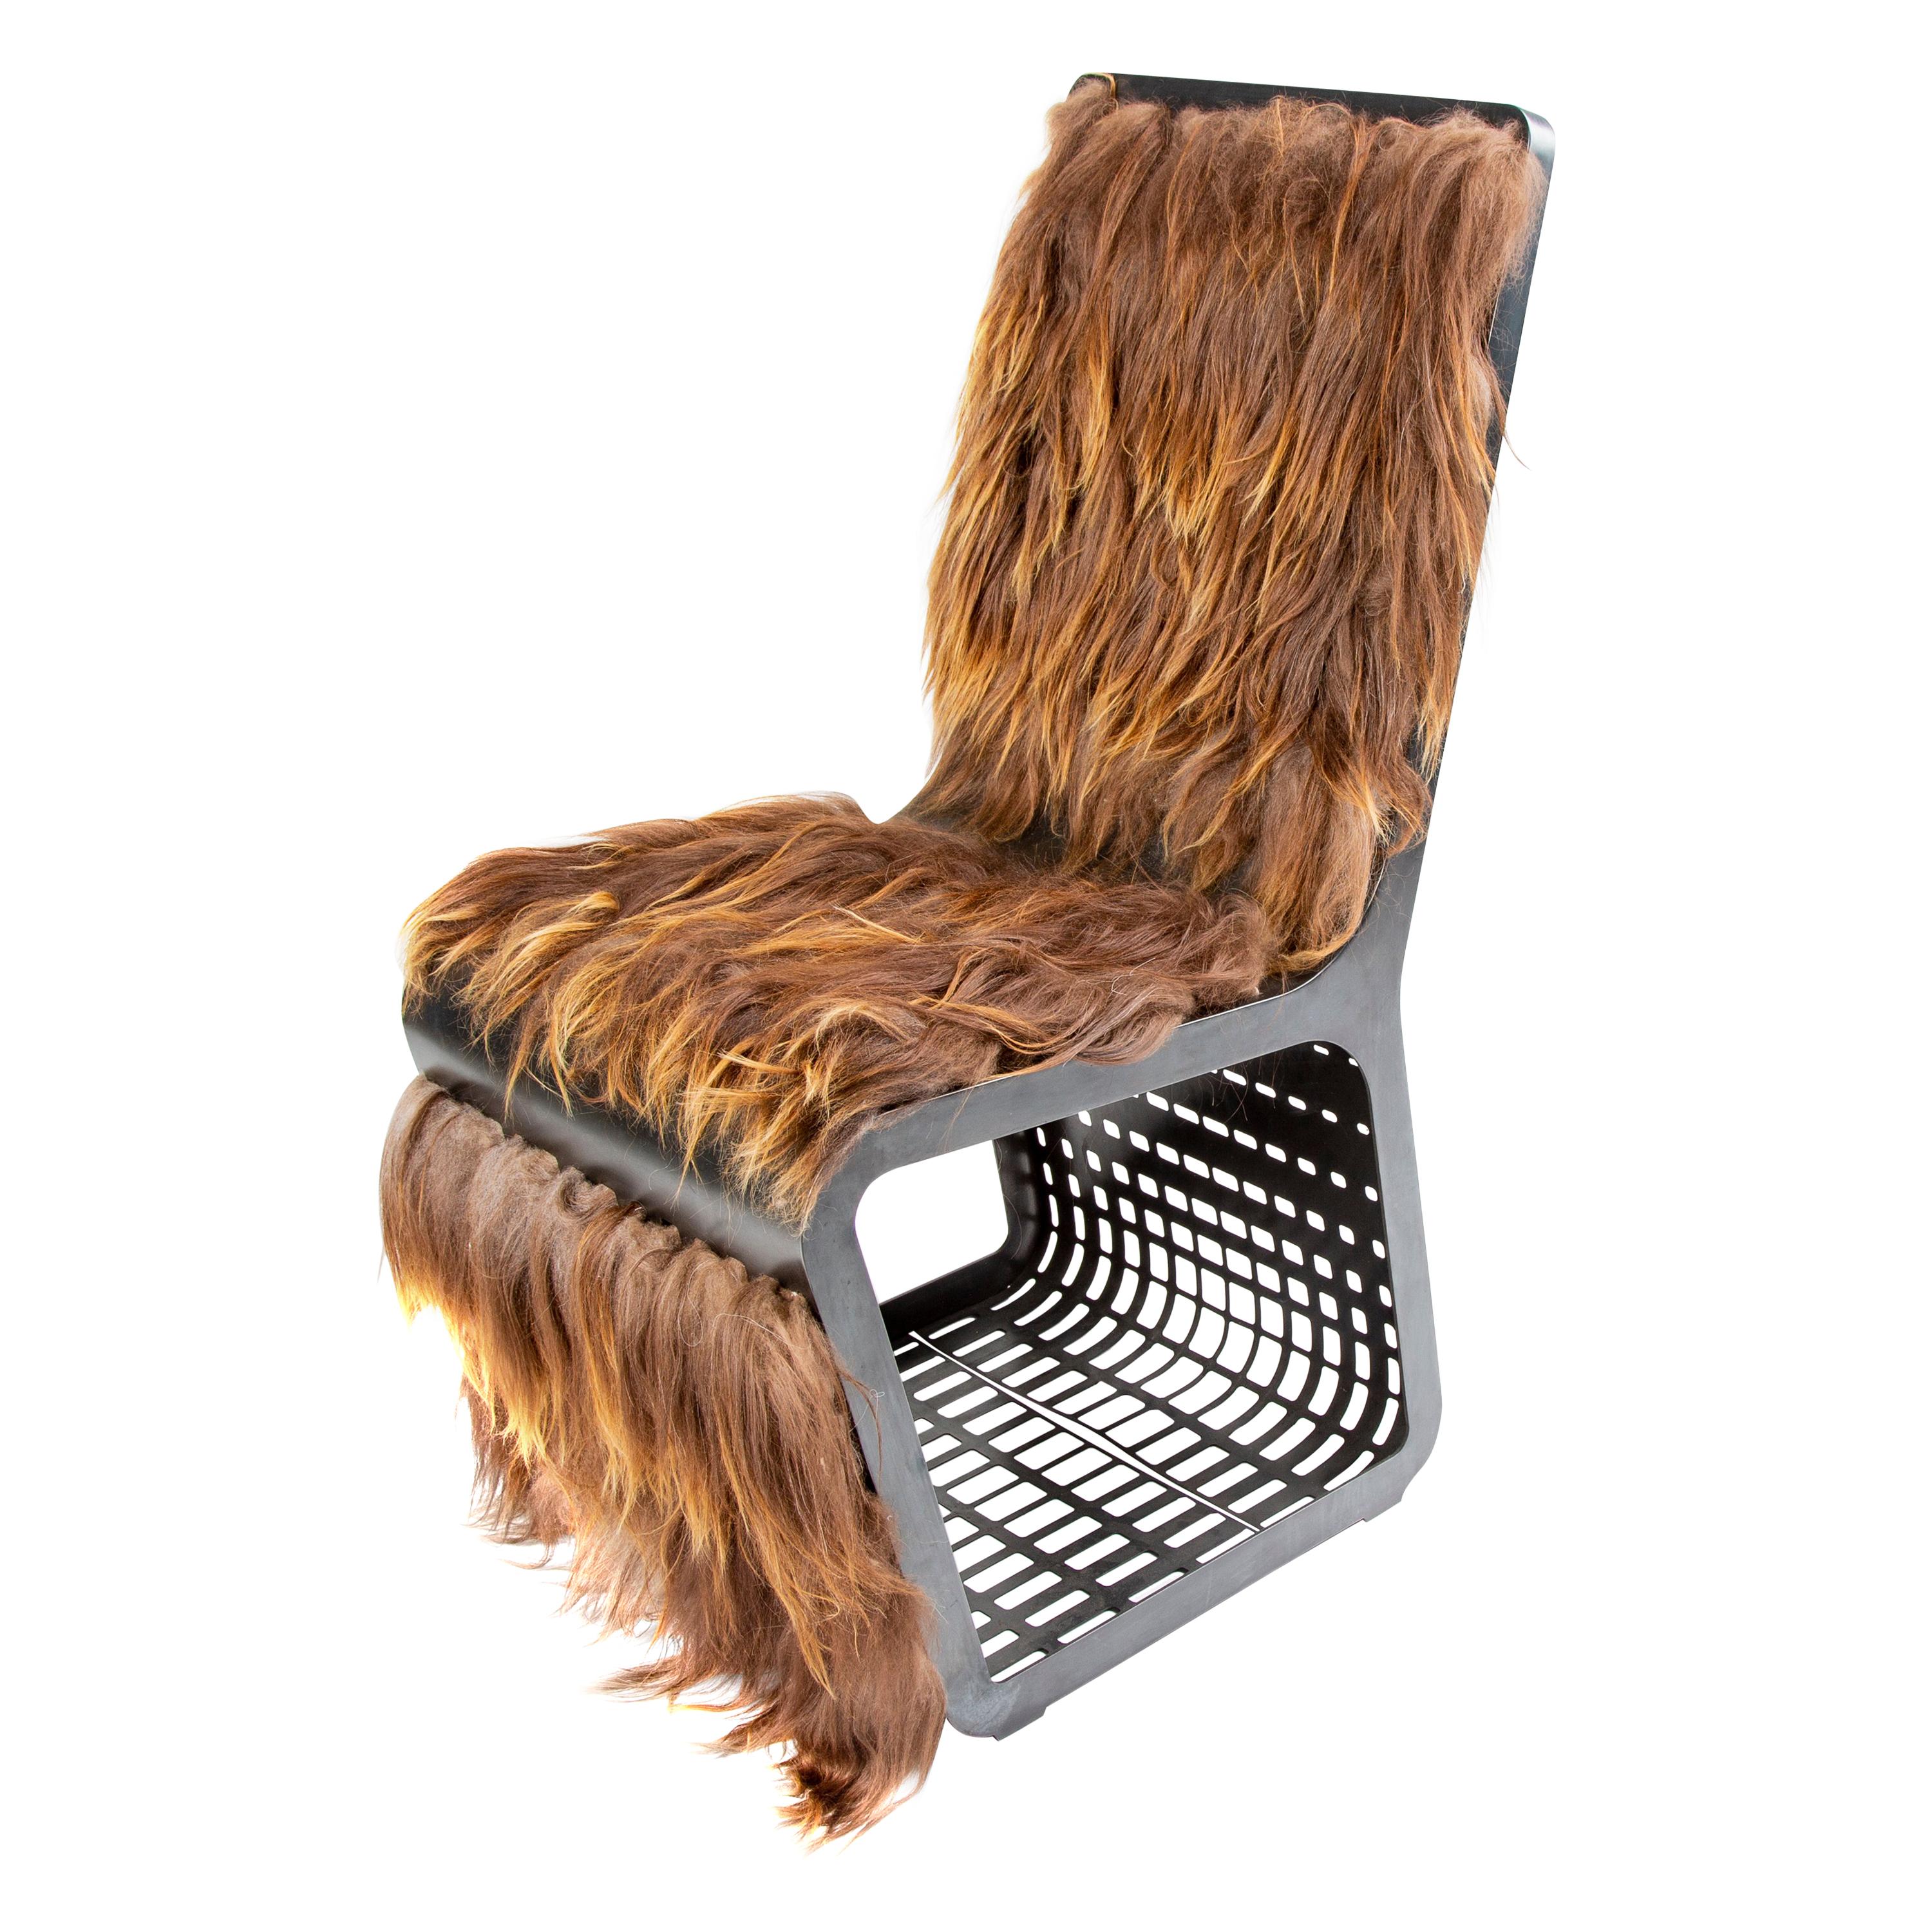 Star Wars Chewbacca Chair, Modern laser Cut Steel Chair with Woven Icelandic Fur For Sale